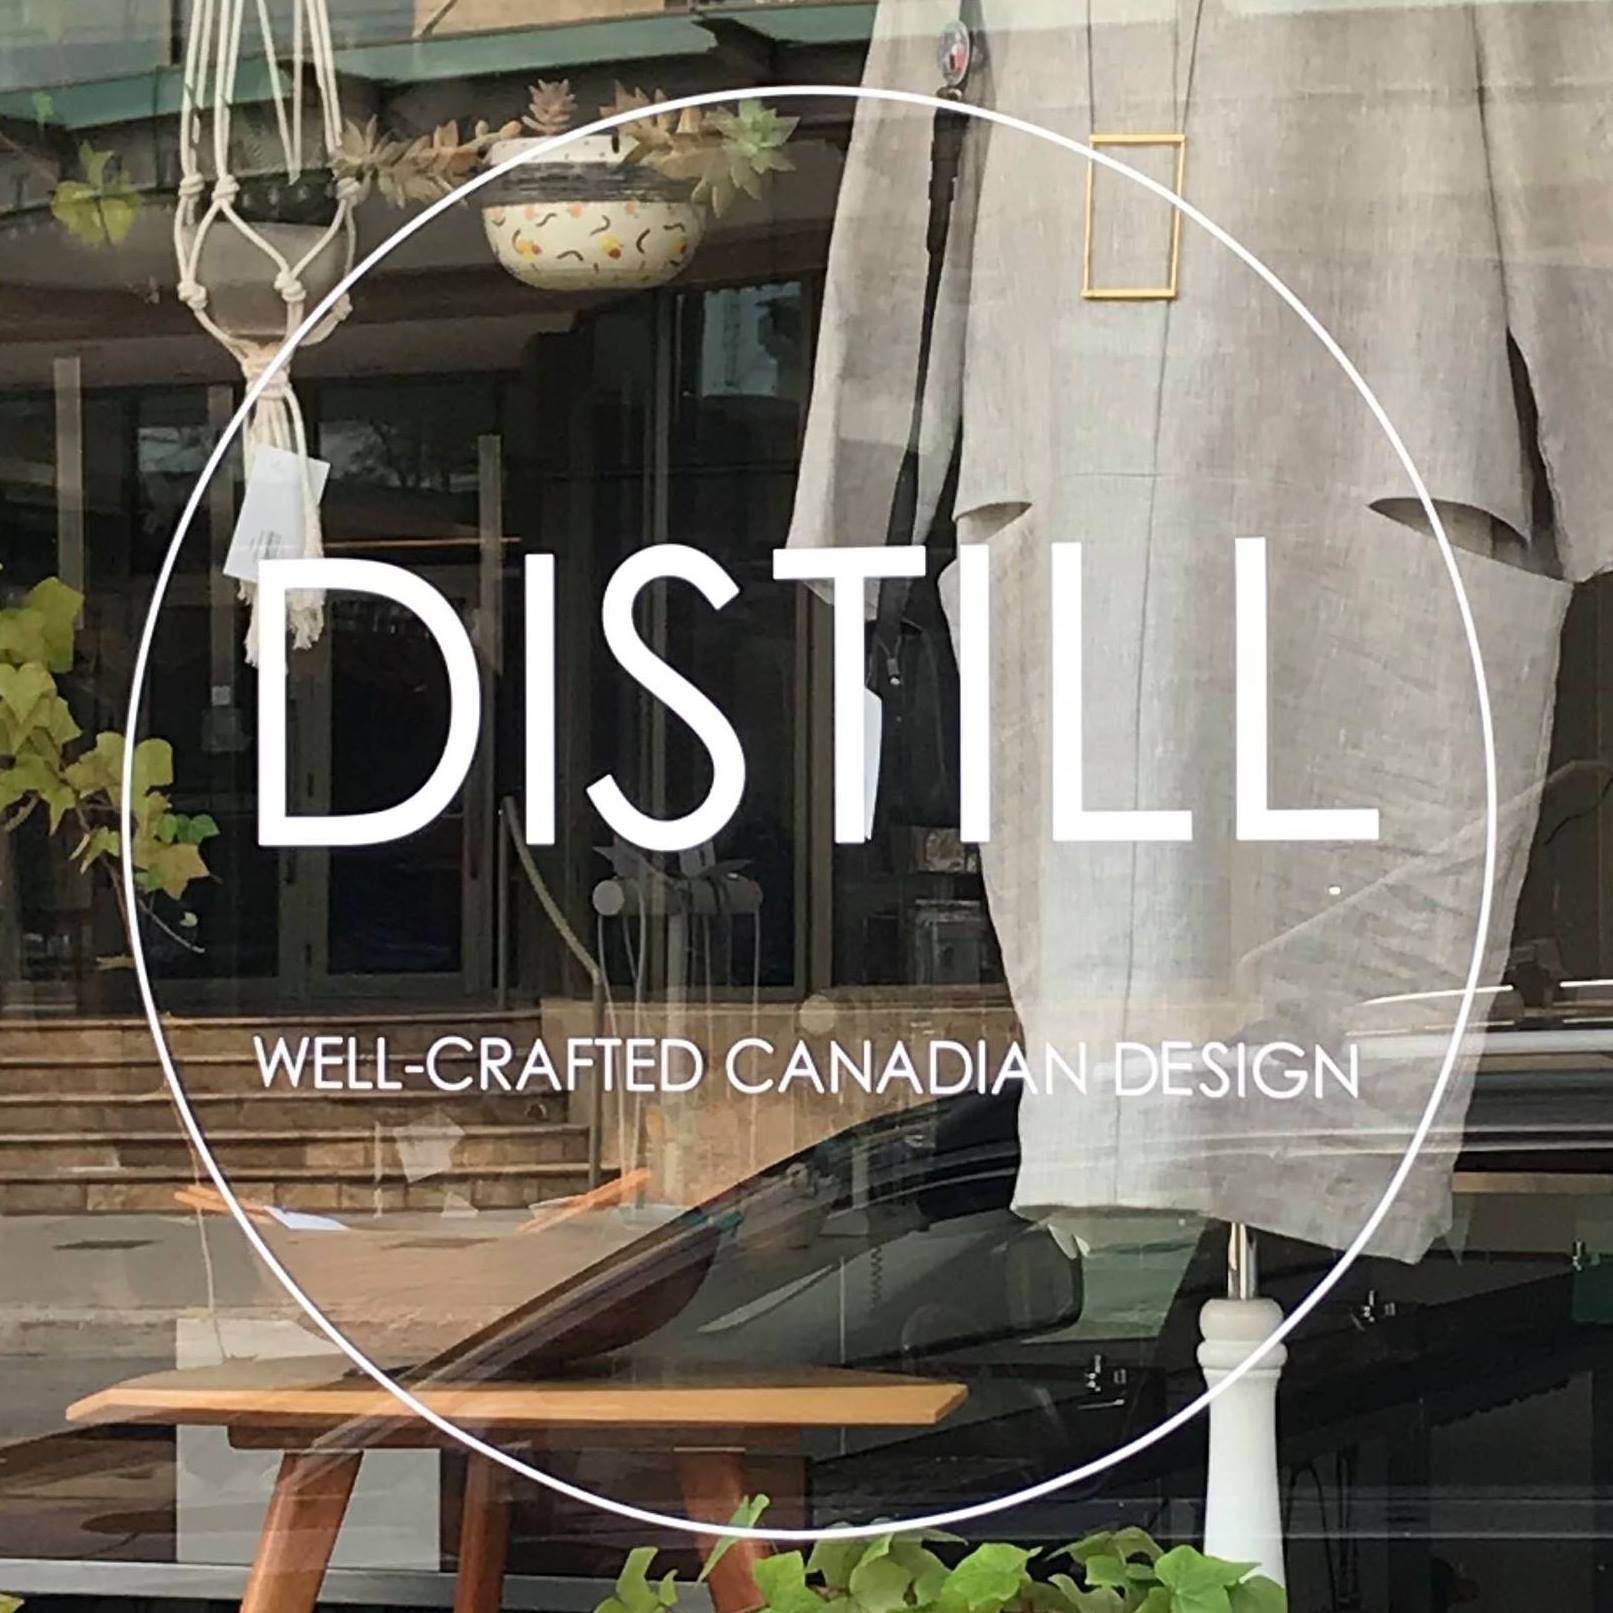 Purveyor of Well-Crafted Canadian Design - Distill Gallery